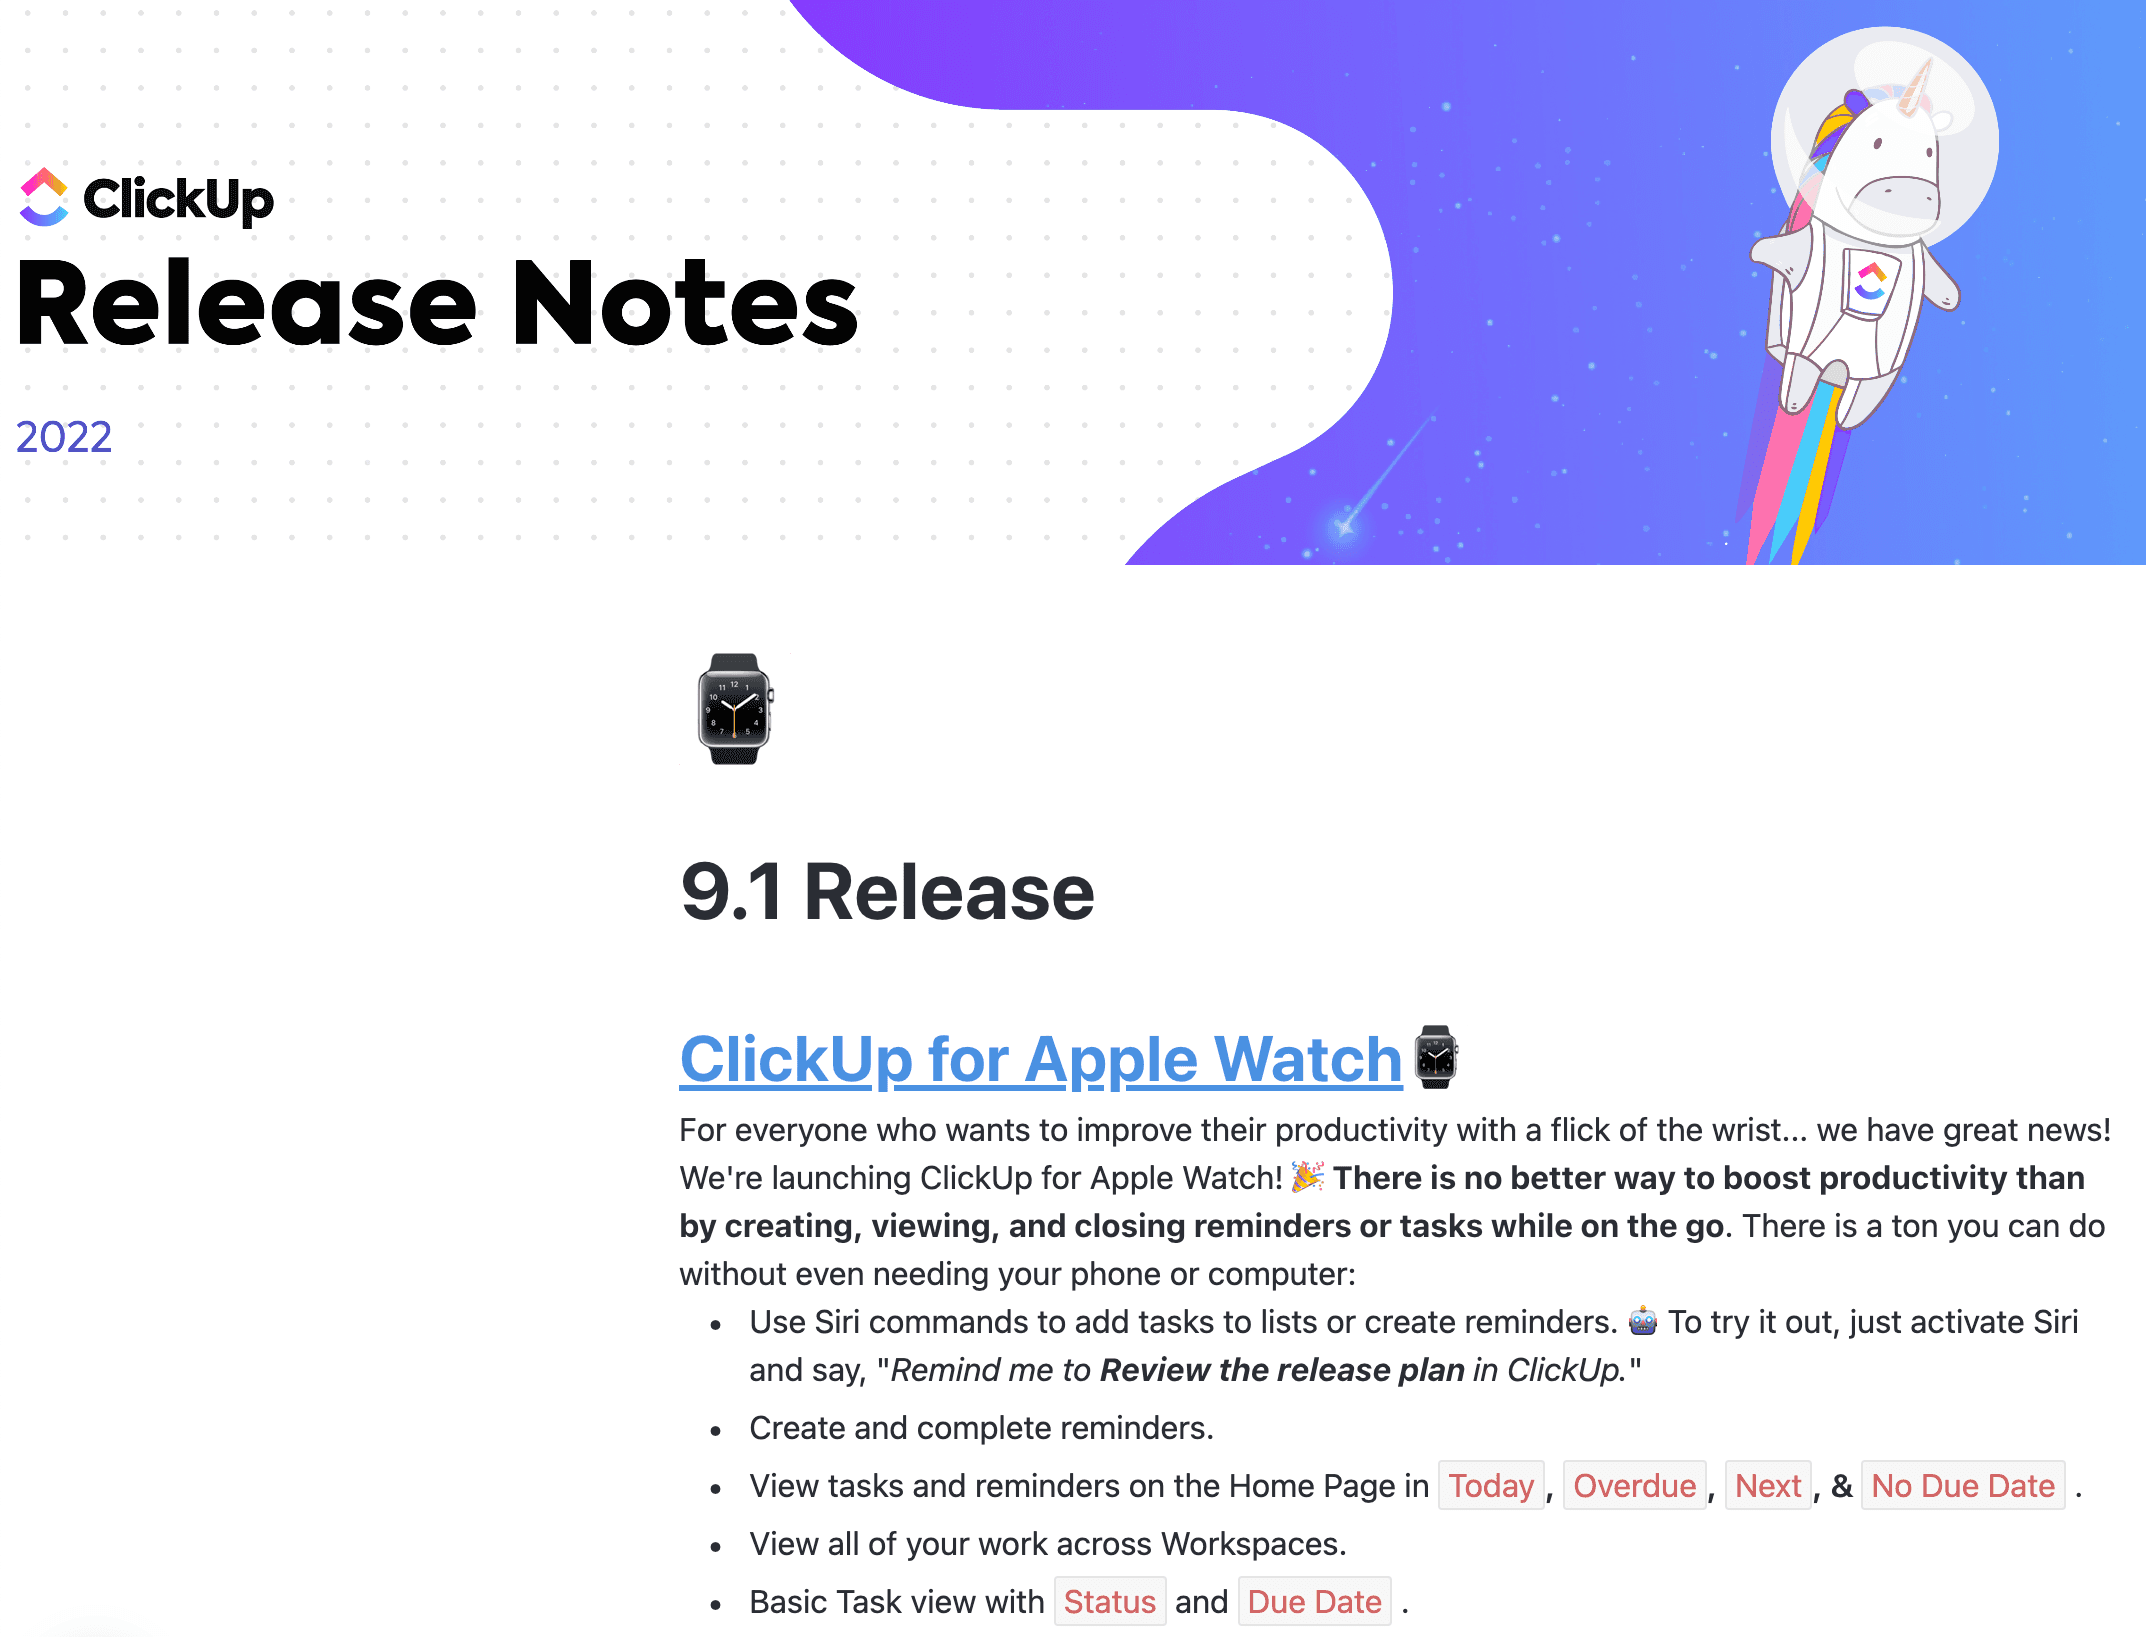 Use ClickUp Docs to create and share release notes. This template provides an example structure that our very own ClickUp Product Teams use to share product release notes both internally and externally.